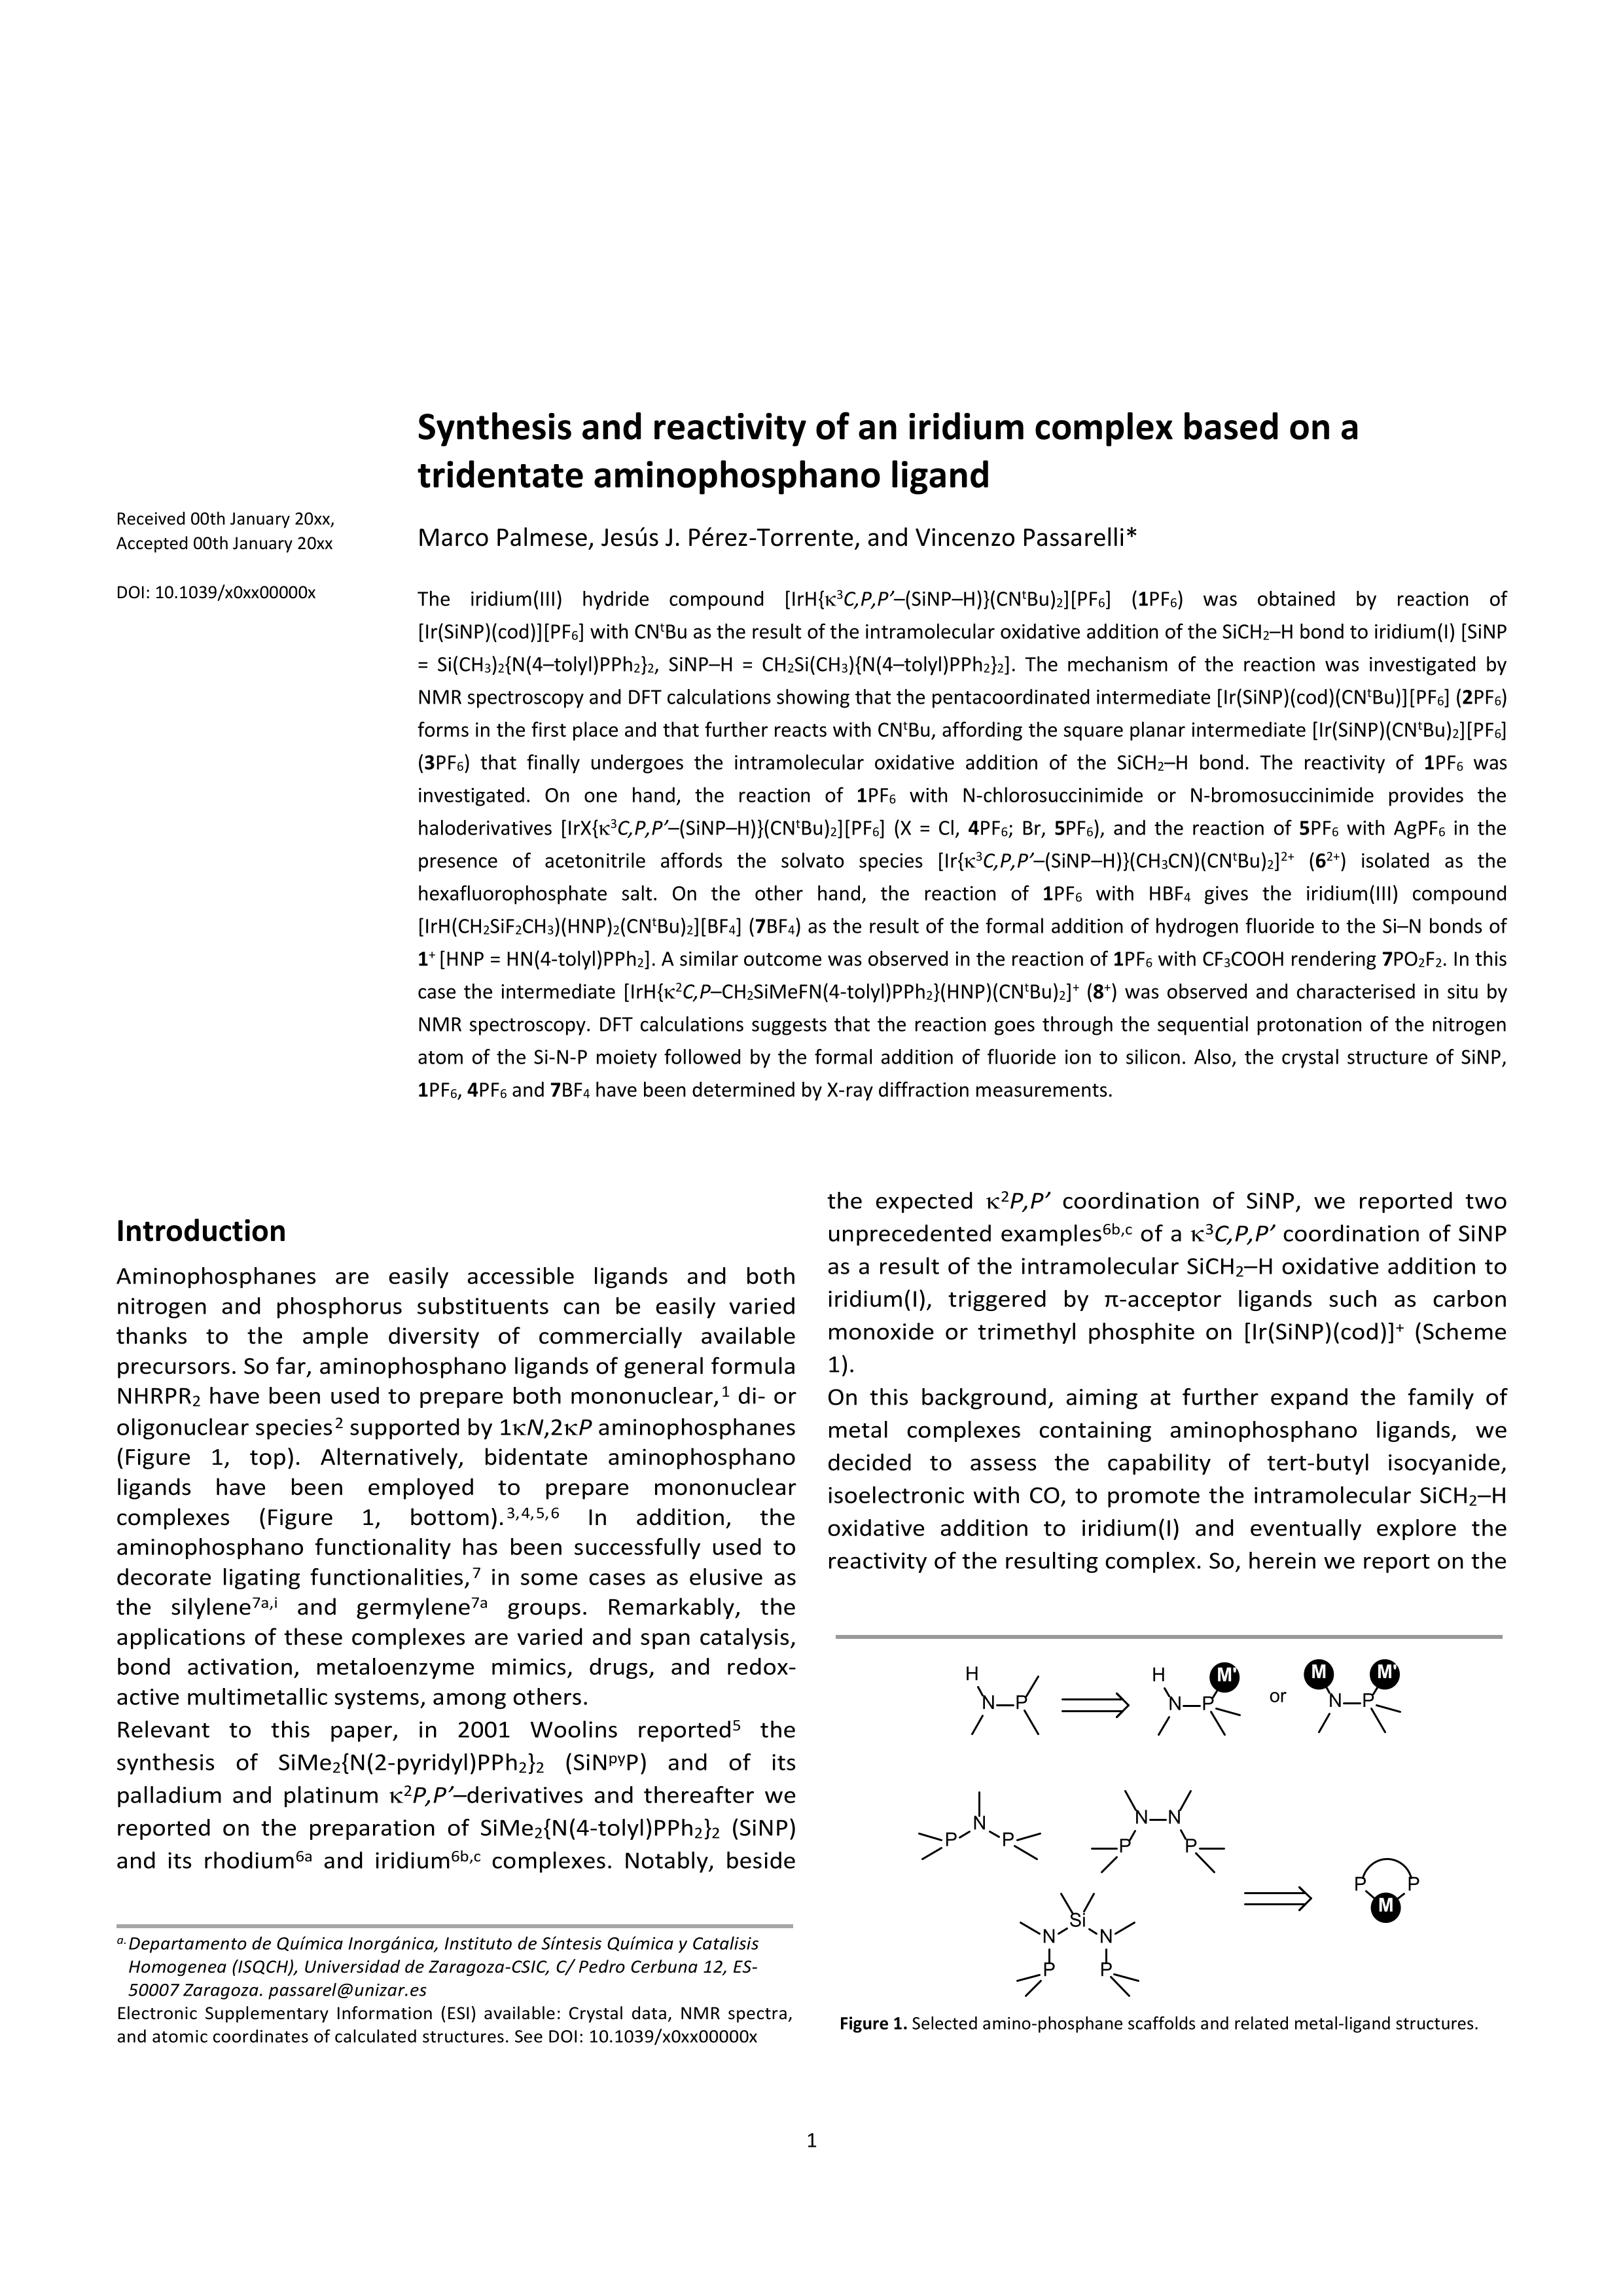 Synthesis and reactivity of an iridium complex based on a tridentate aminophosphano ligand